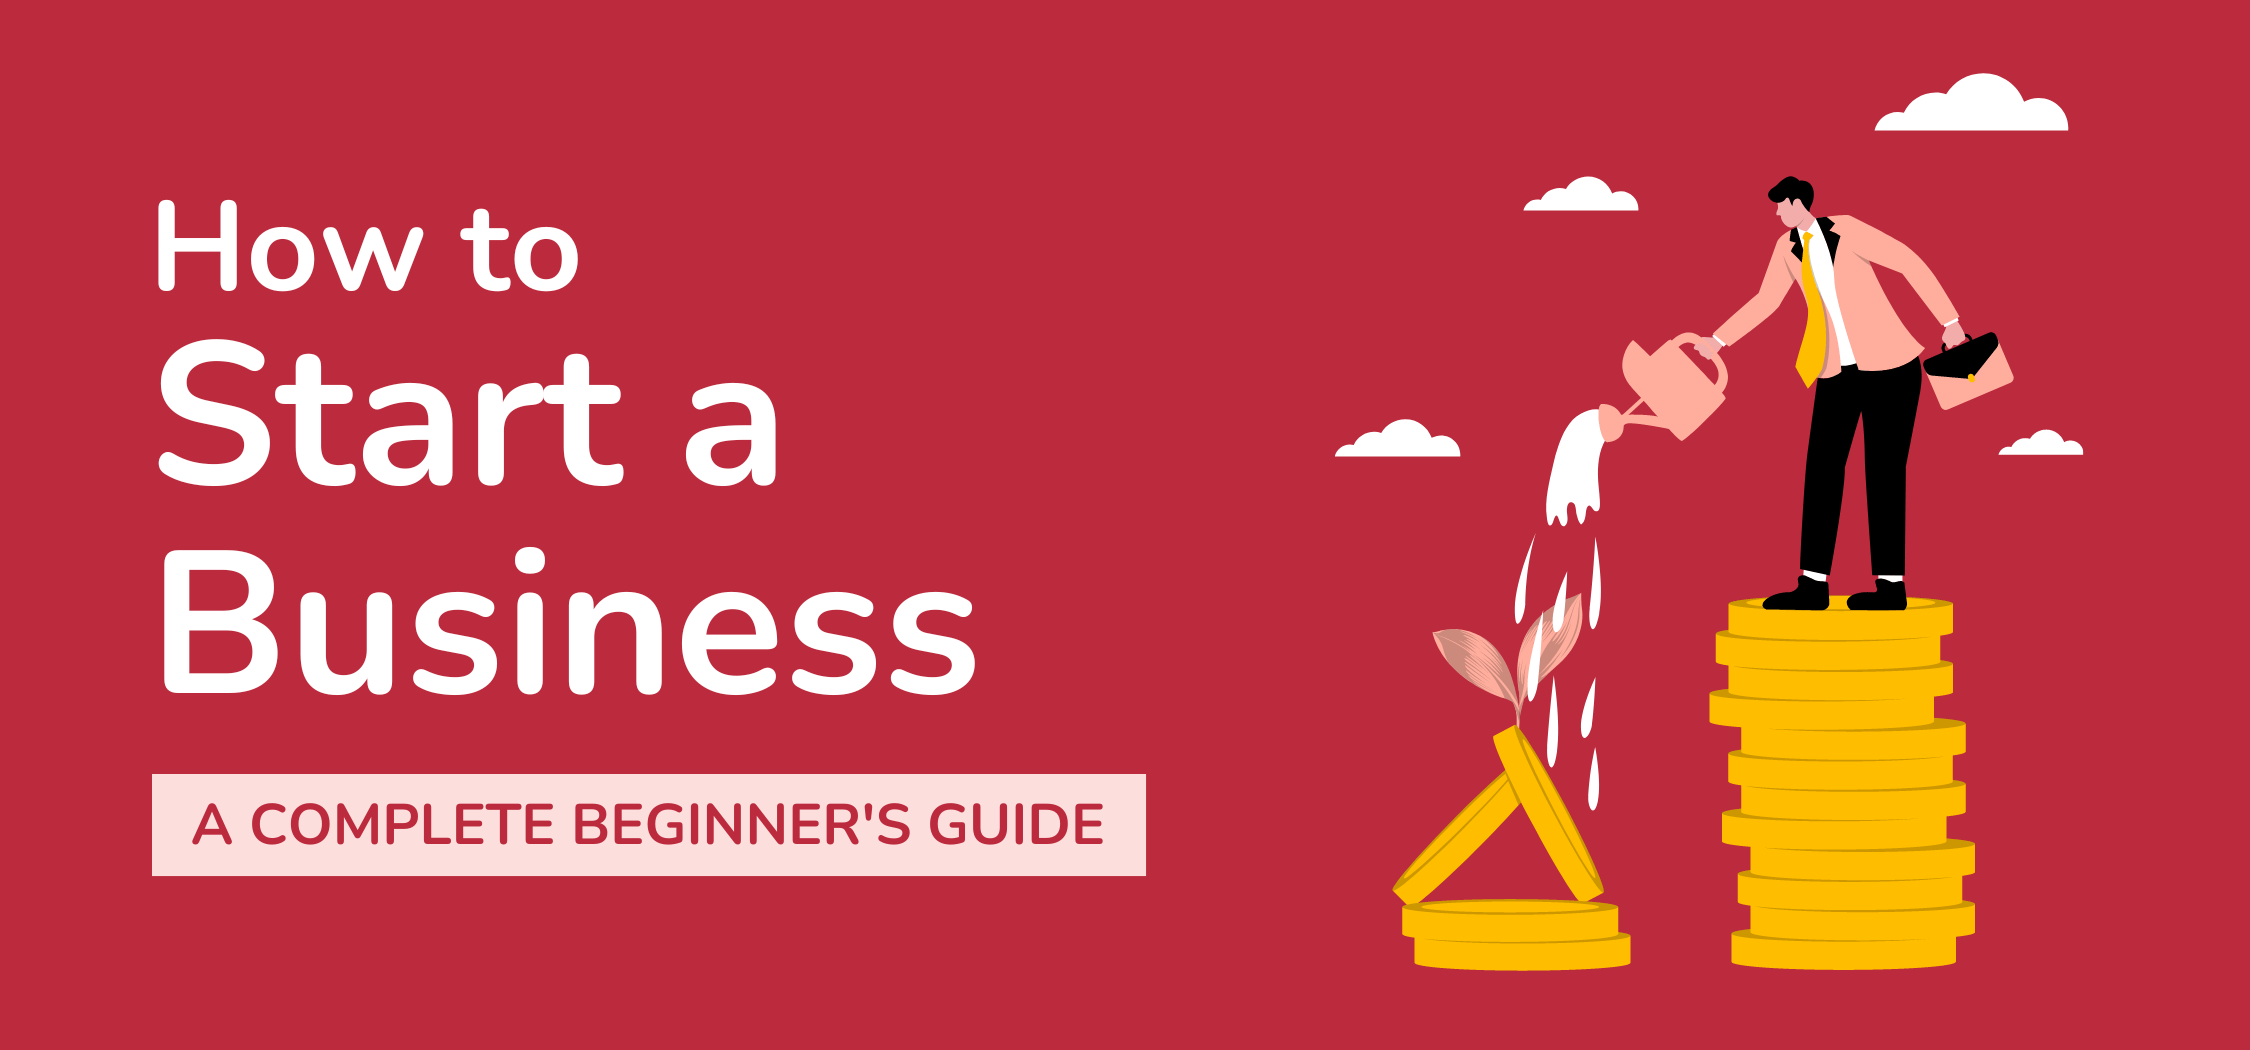 How to Start a Business: A COMPLETE Beginner's Guide